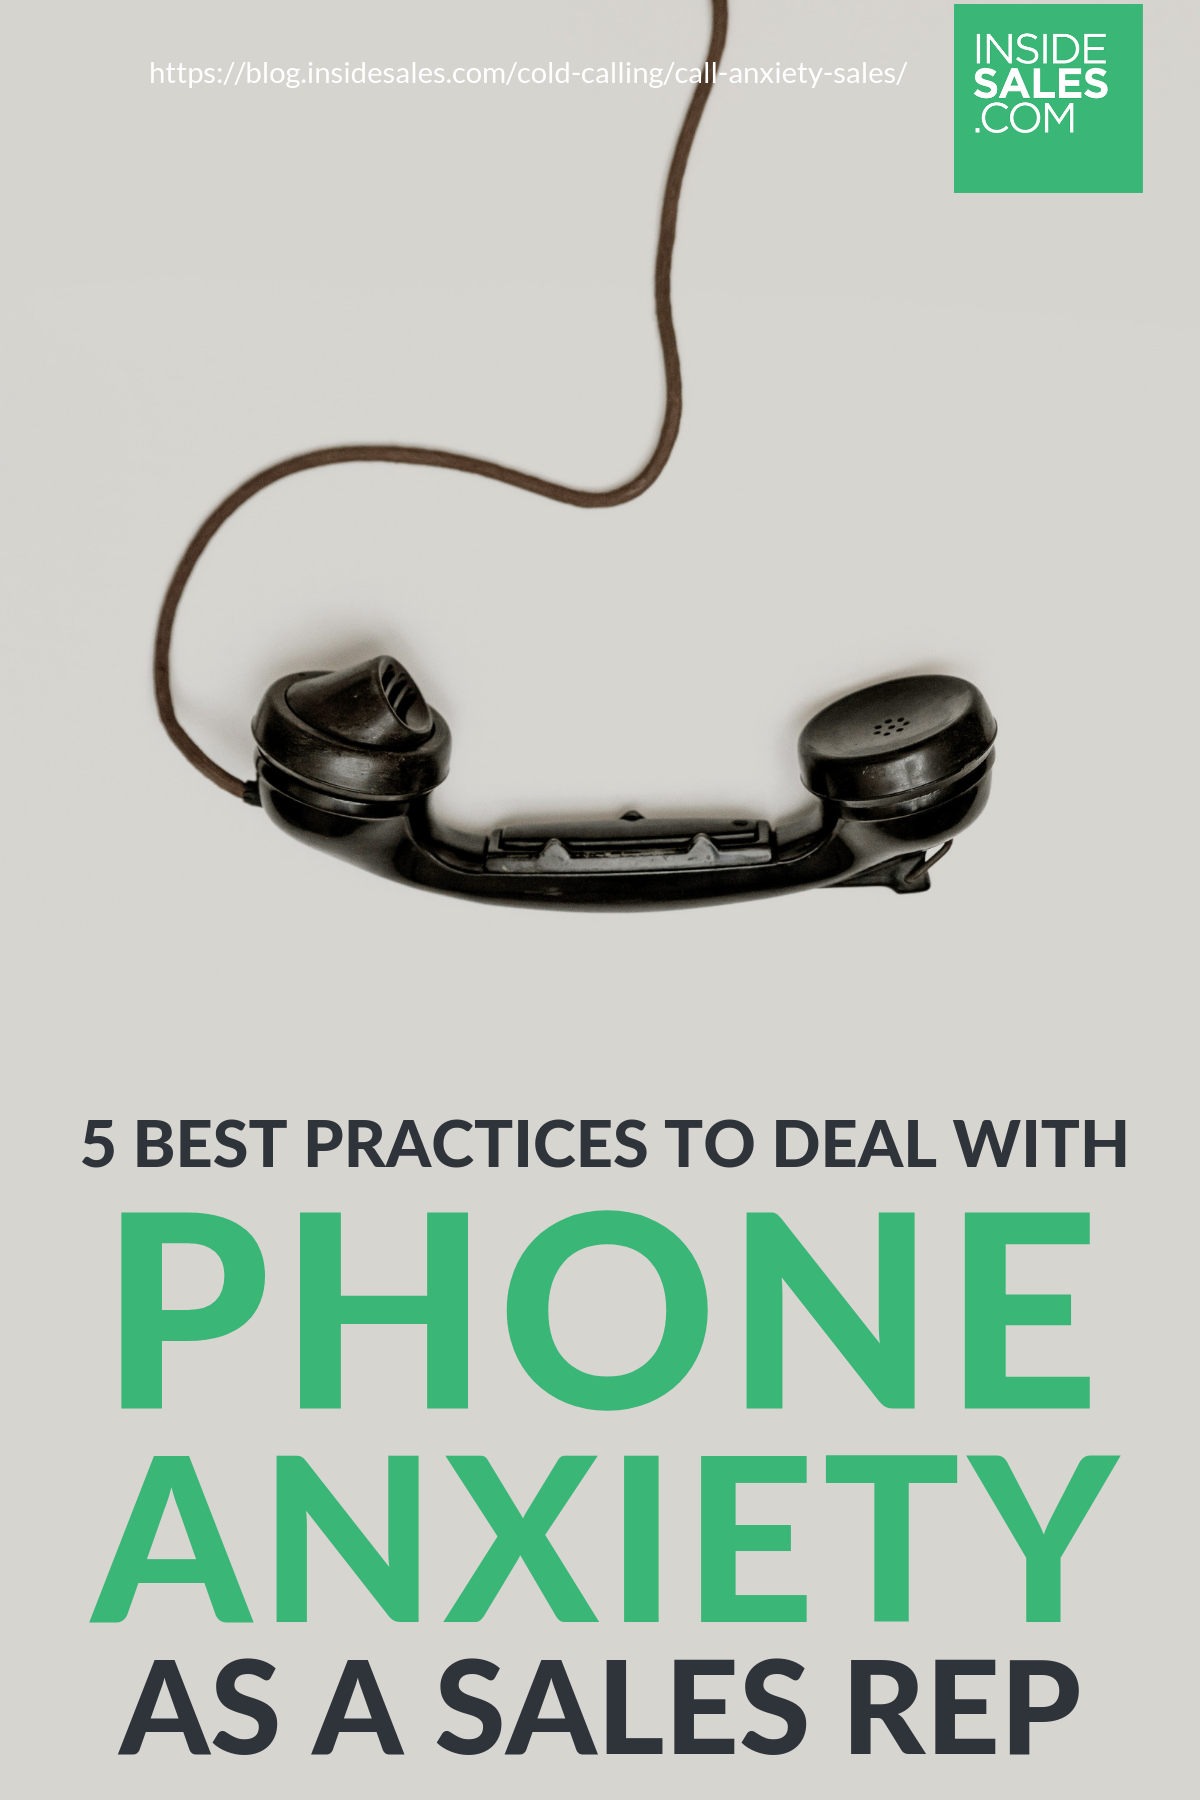 5 Best Practices To Deal With Phone Anxiety As A Sales Rep https://resources.insidesales.com/blog/cold-calling/call-anxiety-sales/